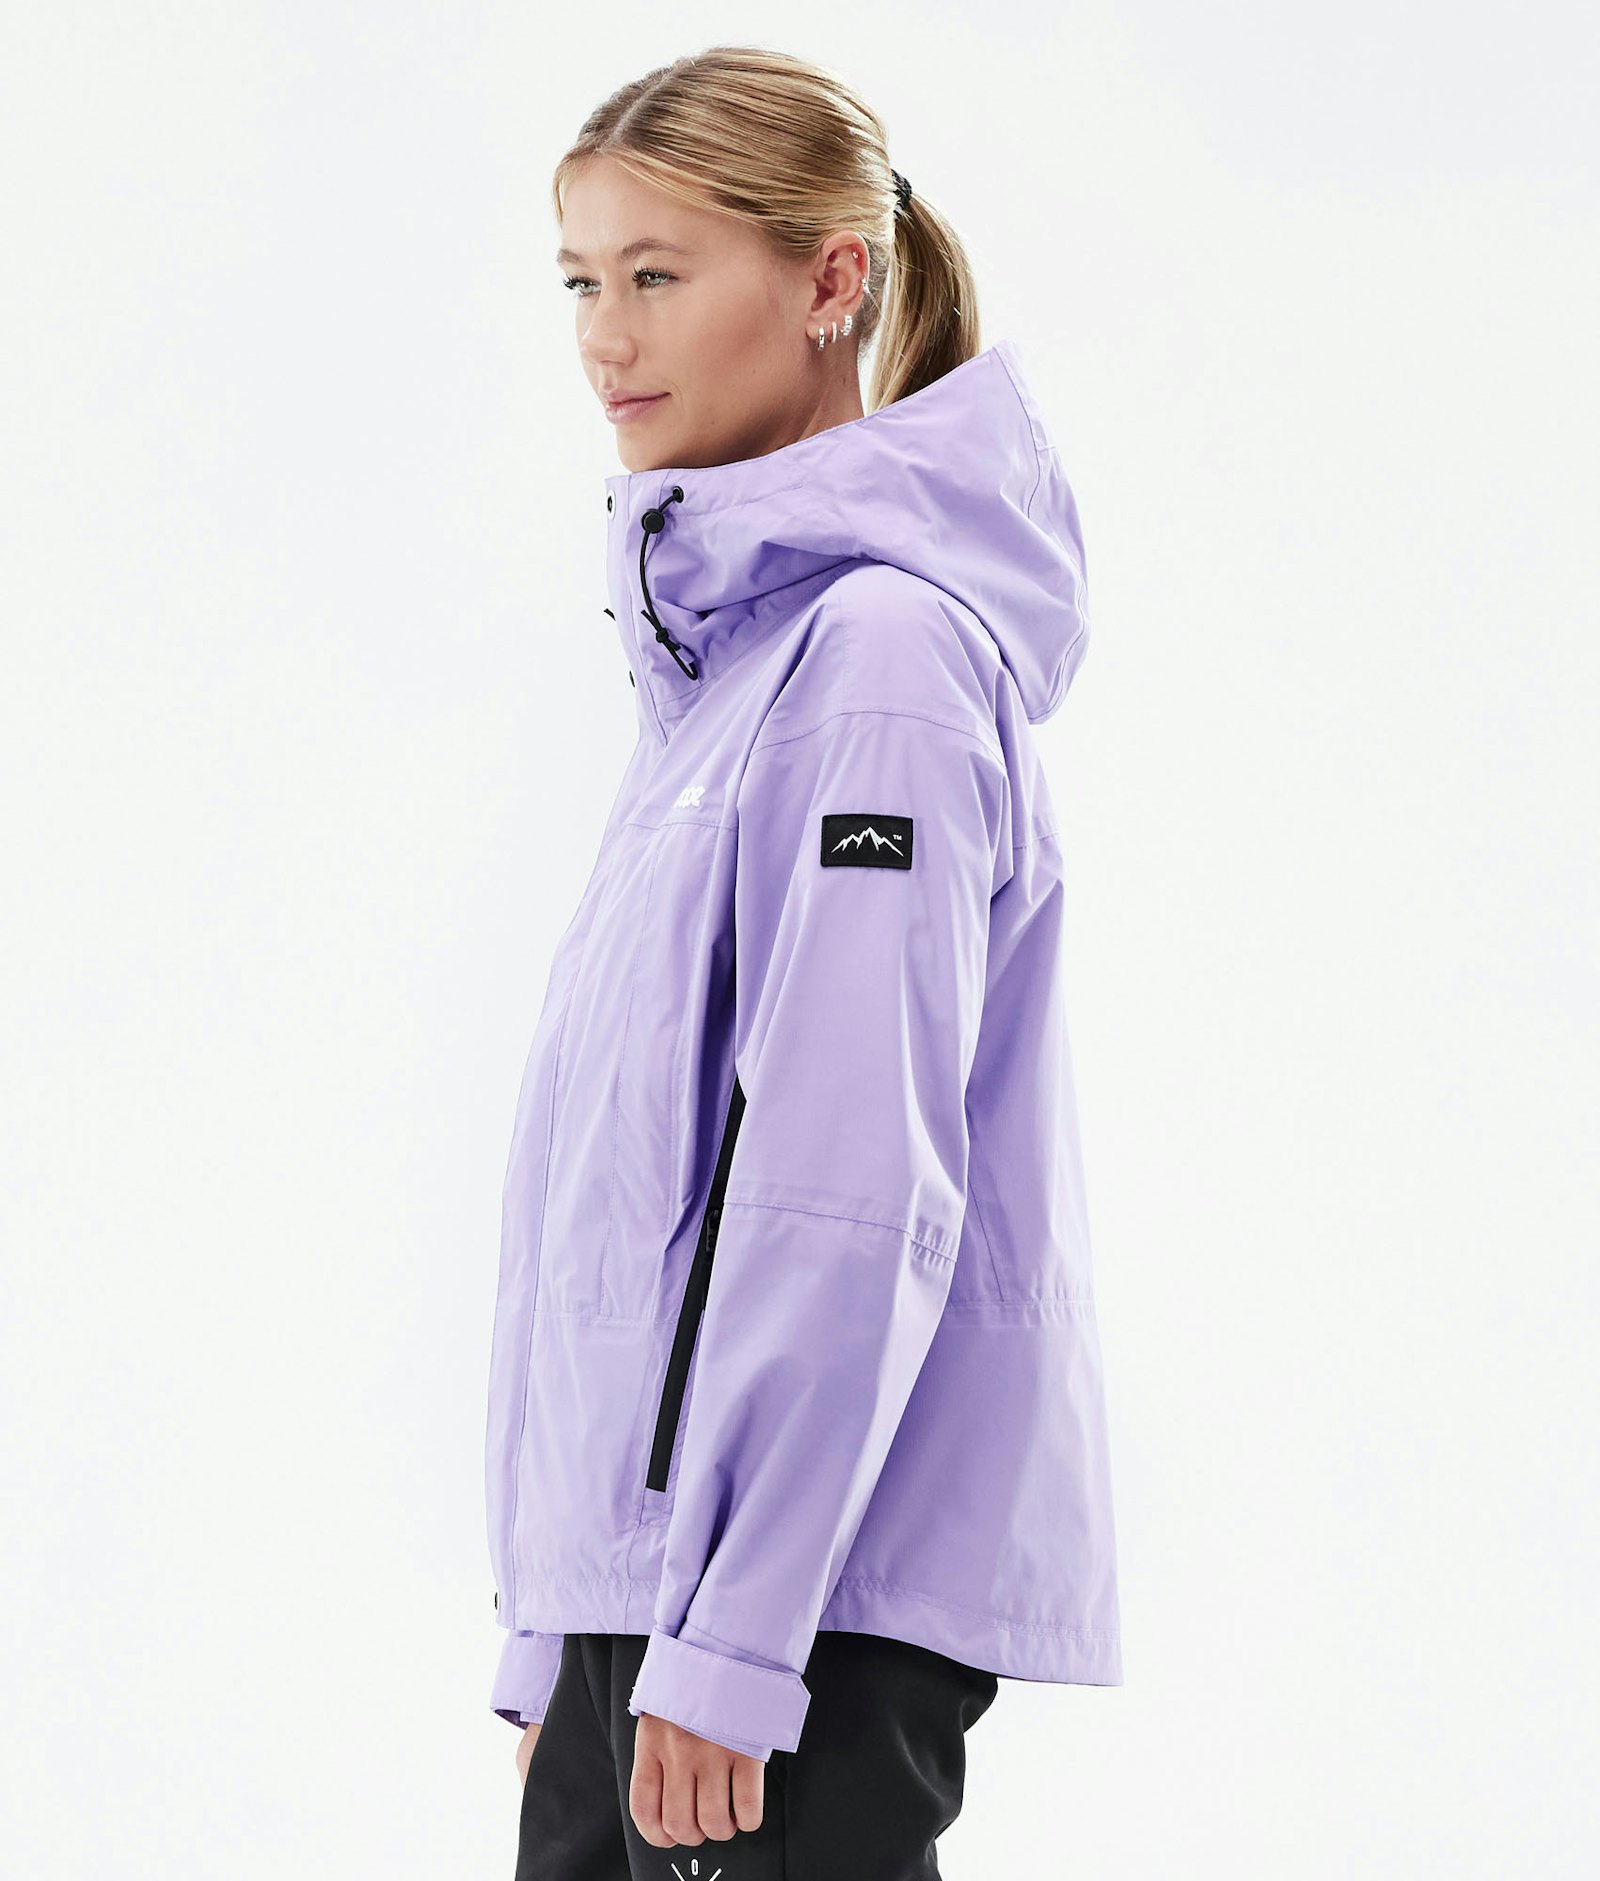 Ranger Light W Giacca Outdoor Donna Faded Violet Renewed, Immagine 6 di 10